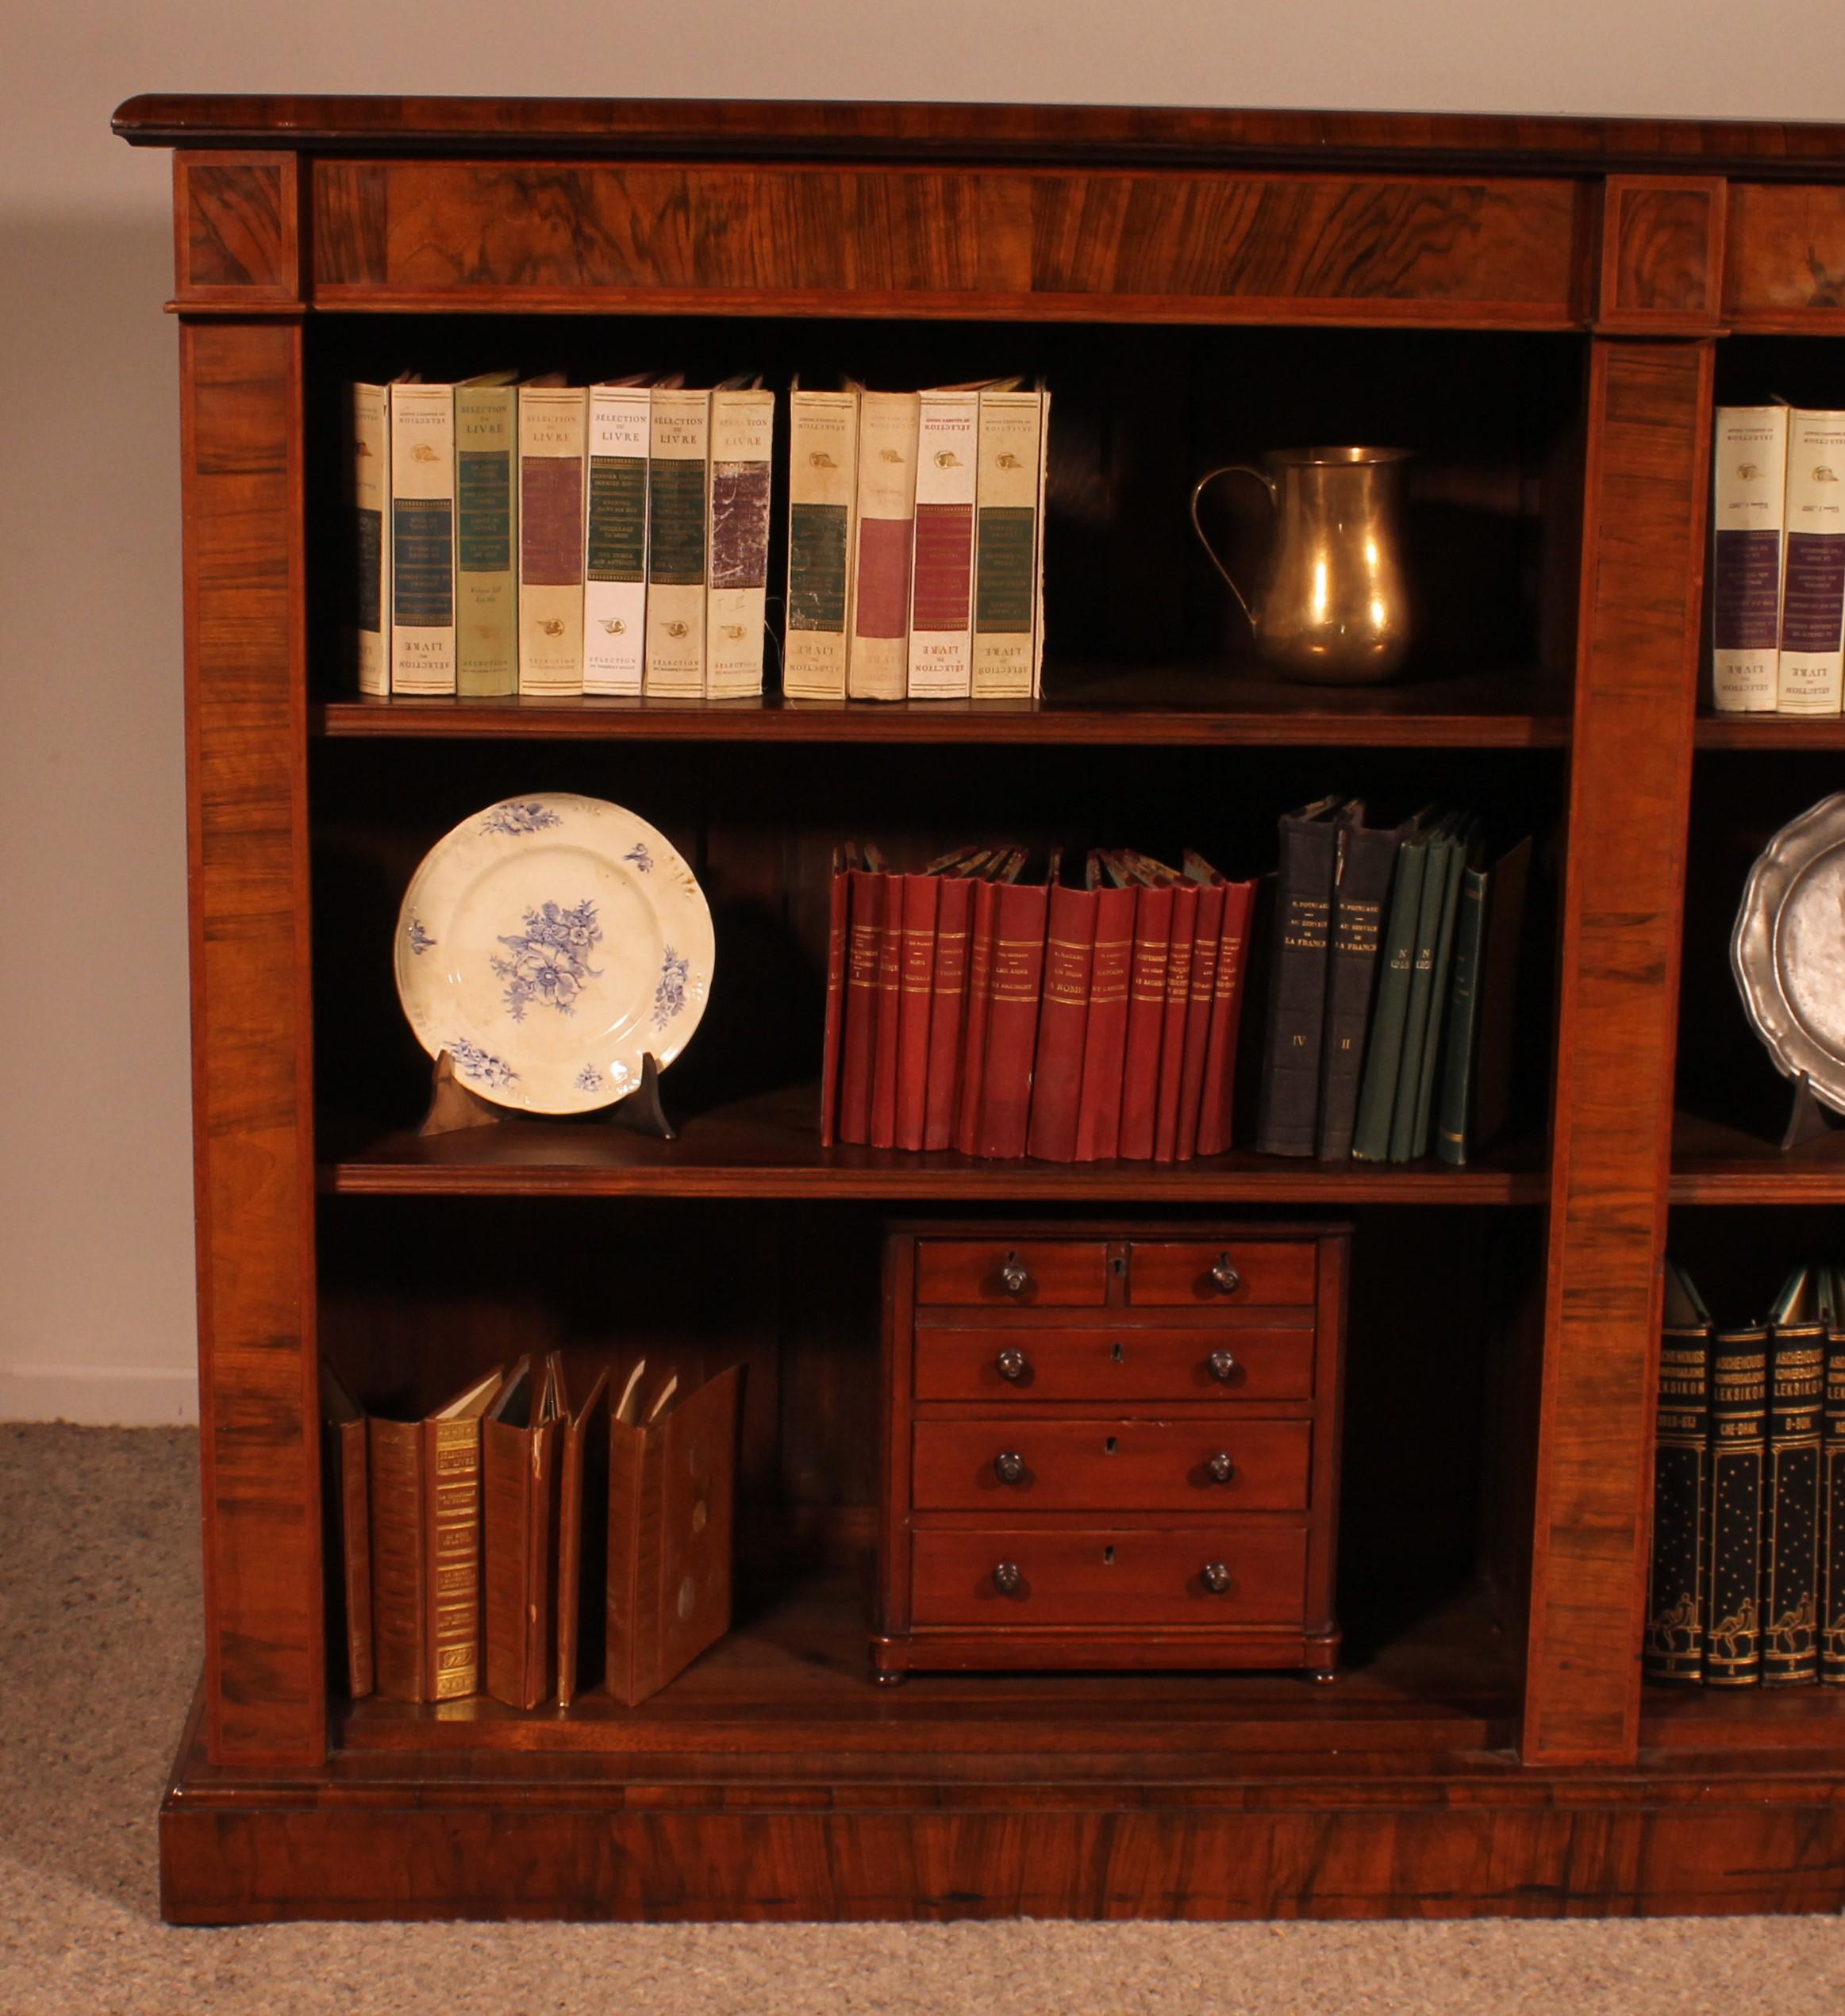 Victorian Large Open Bookcase In Walnut And Inlays From The 19th Century